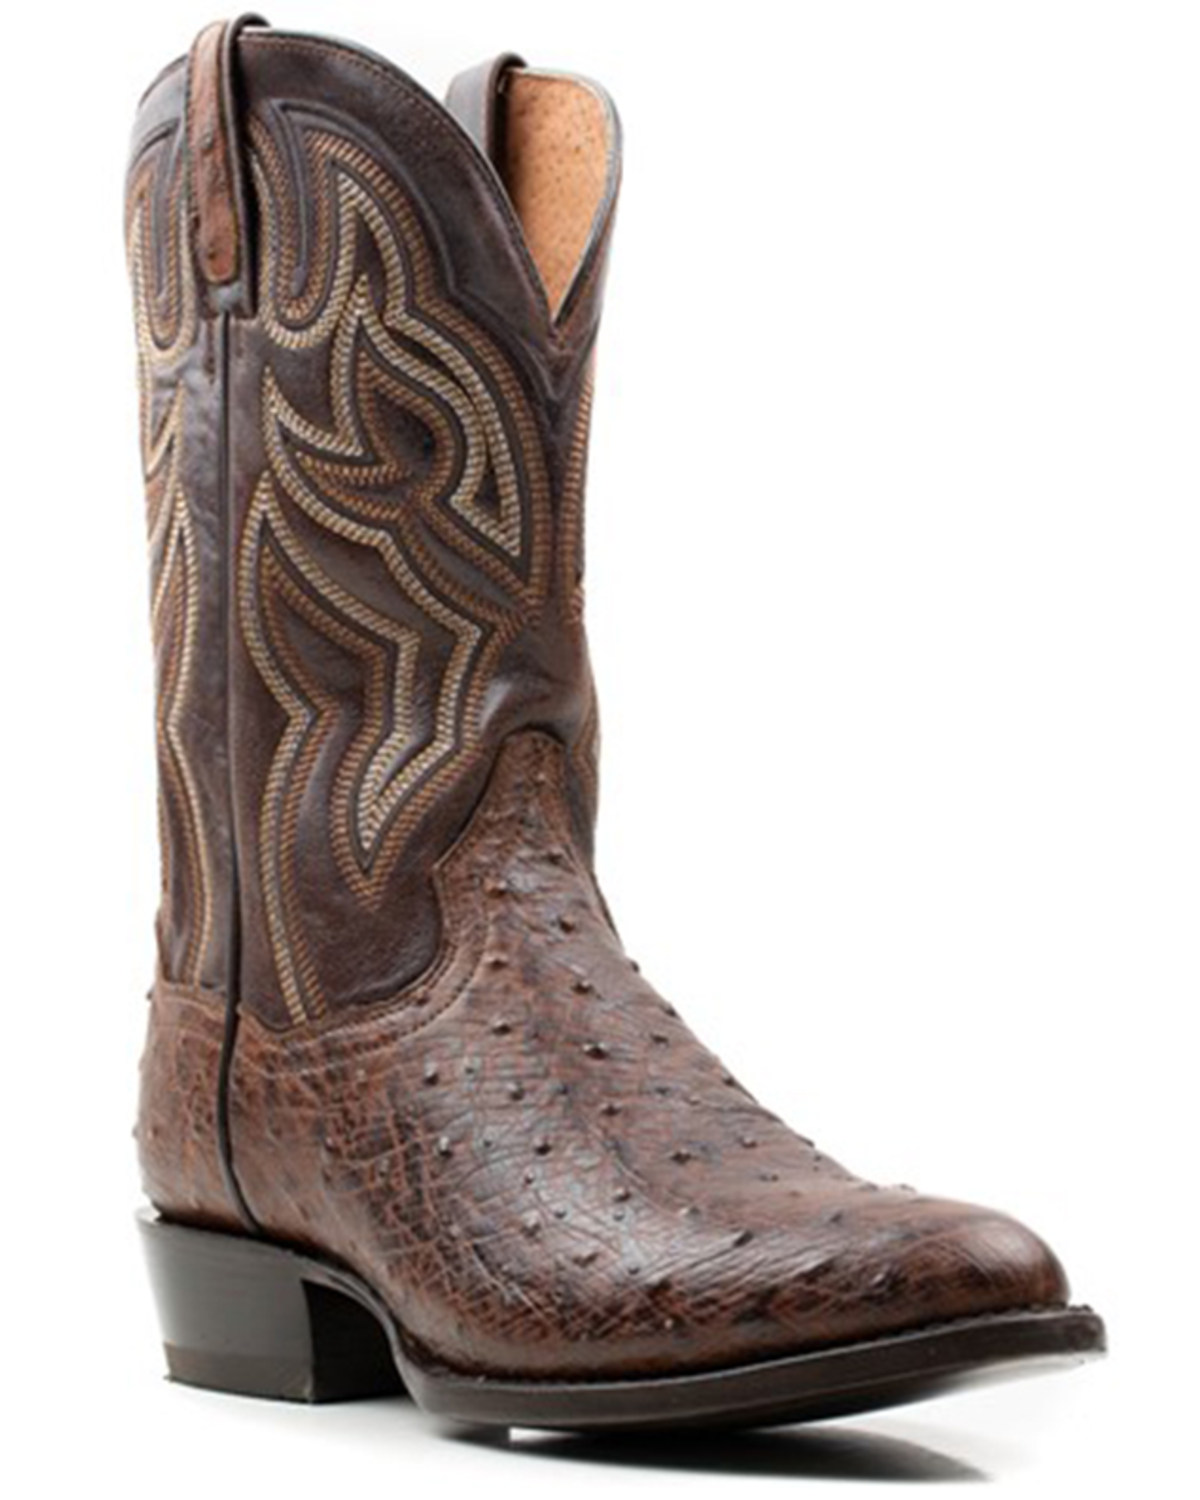 Dan Post Men's 12" Hand Quill French Exotic Western Boots - Medium Toe